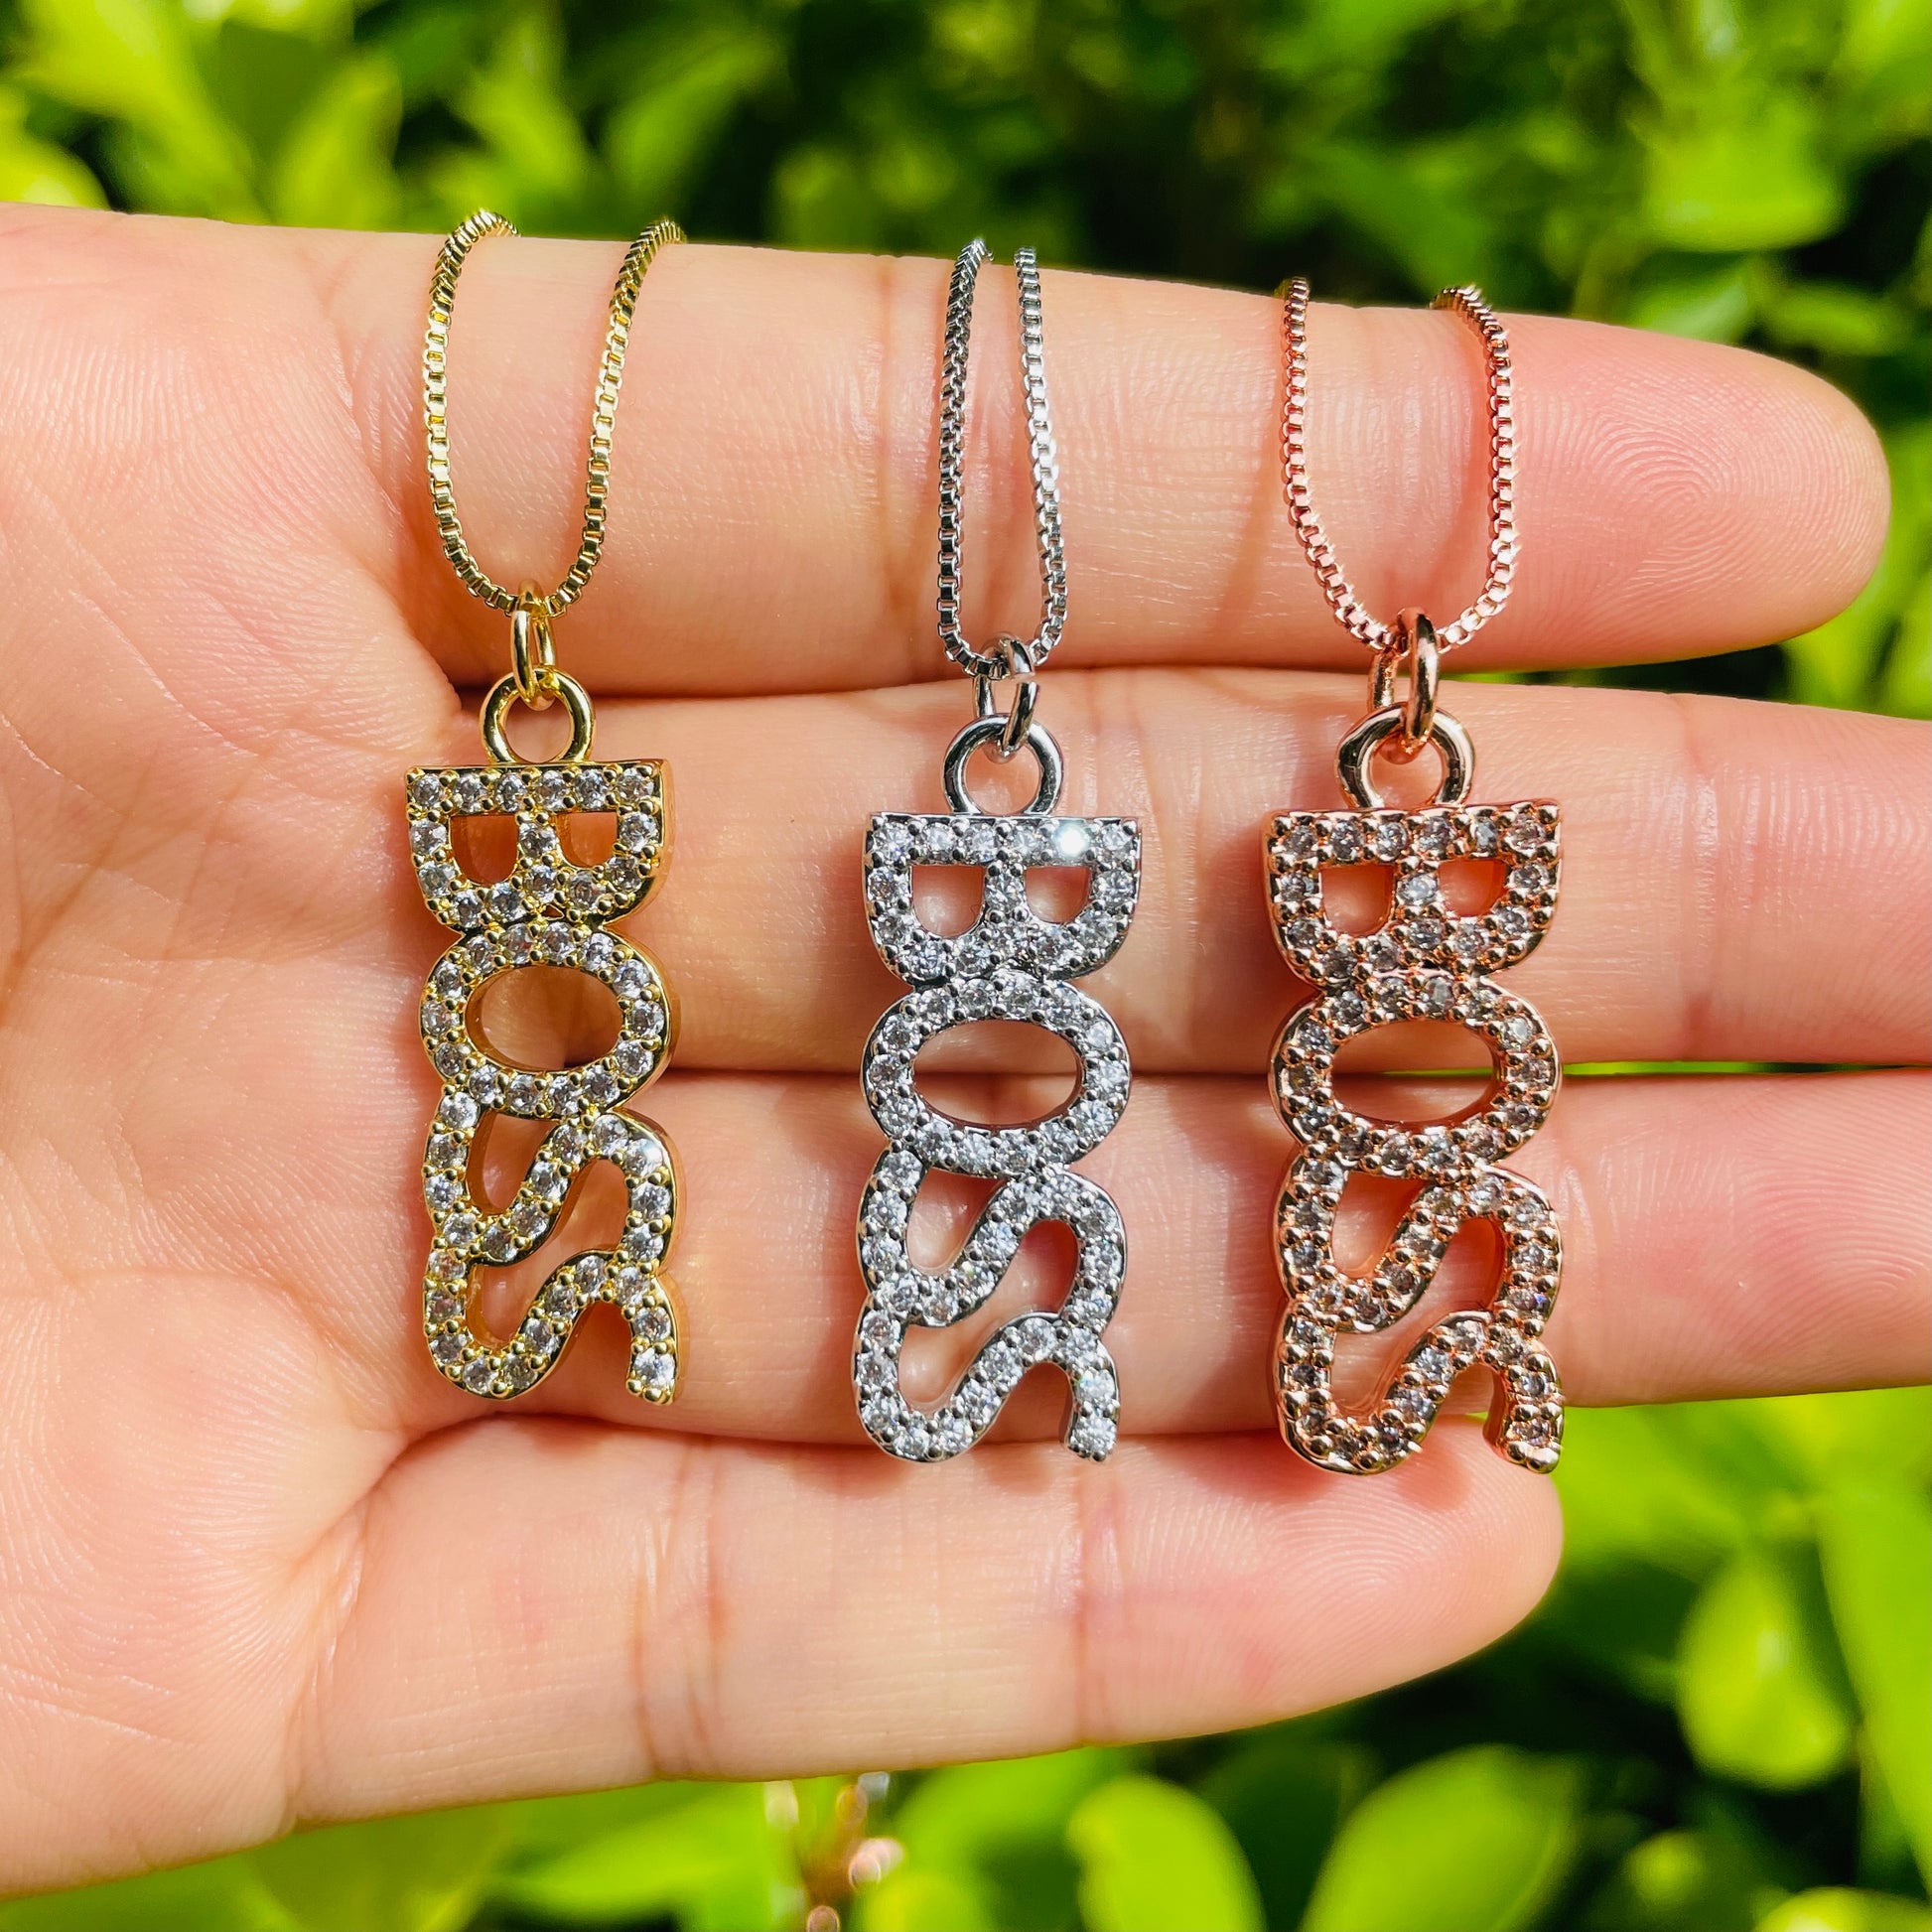 5pcs/lot 30*11mm CZ Paved Boss Necklaces Necklaces Charms Beads Beyond